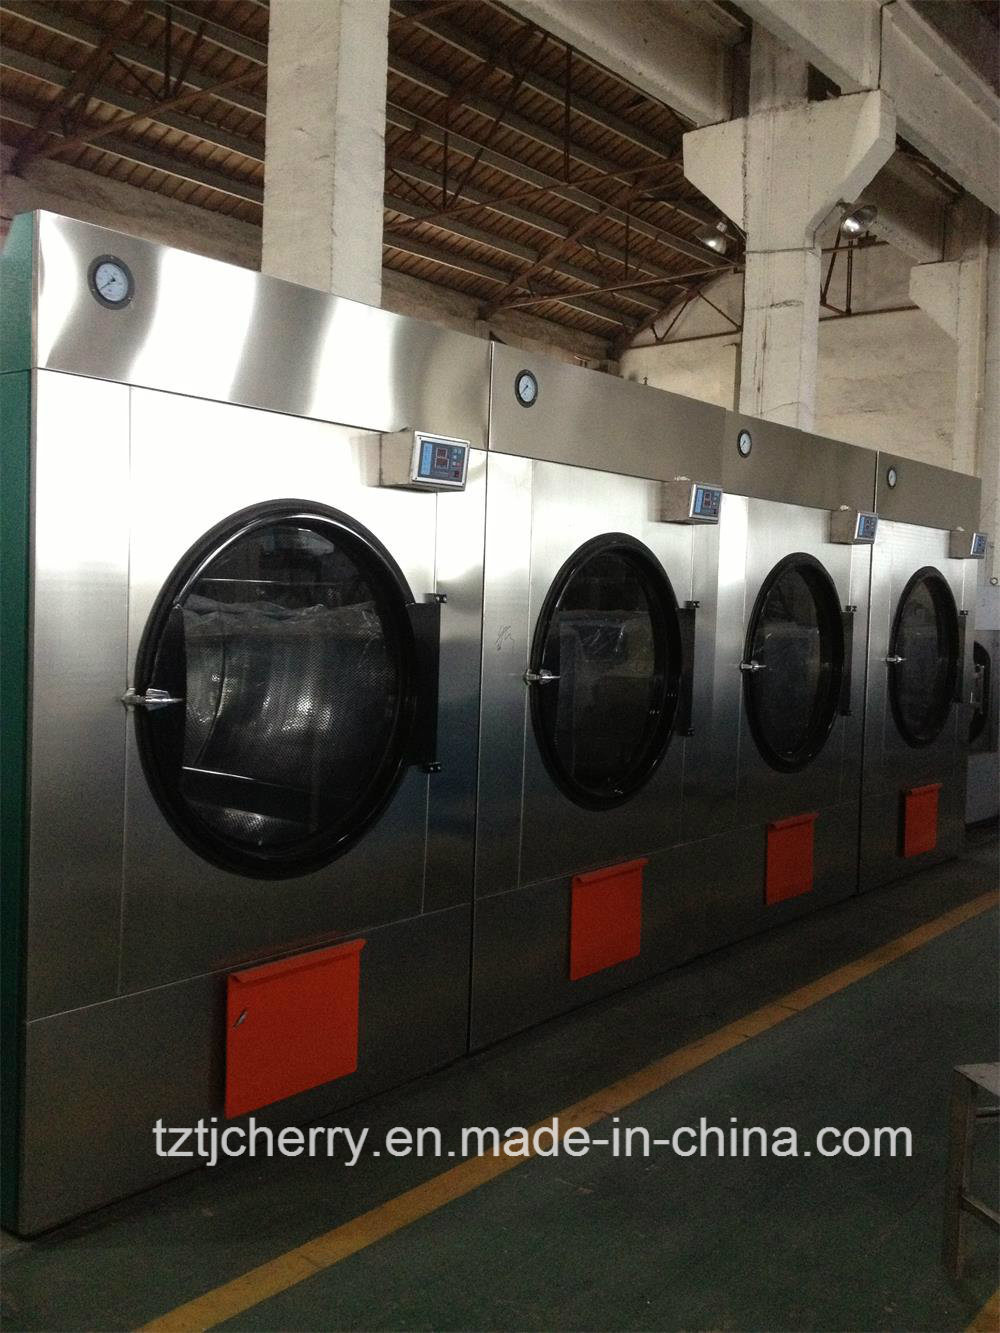 100-180kg Hotel Laundry Towel Clothes Steam/Electric Tumble Dryer